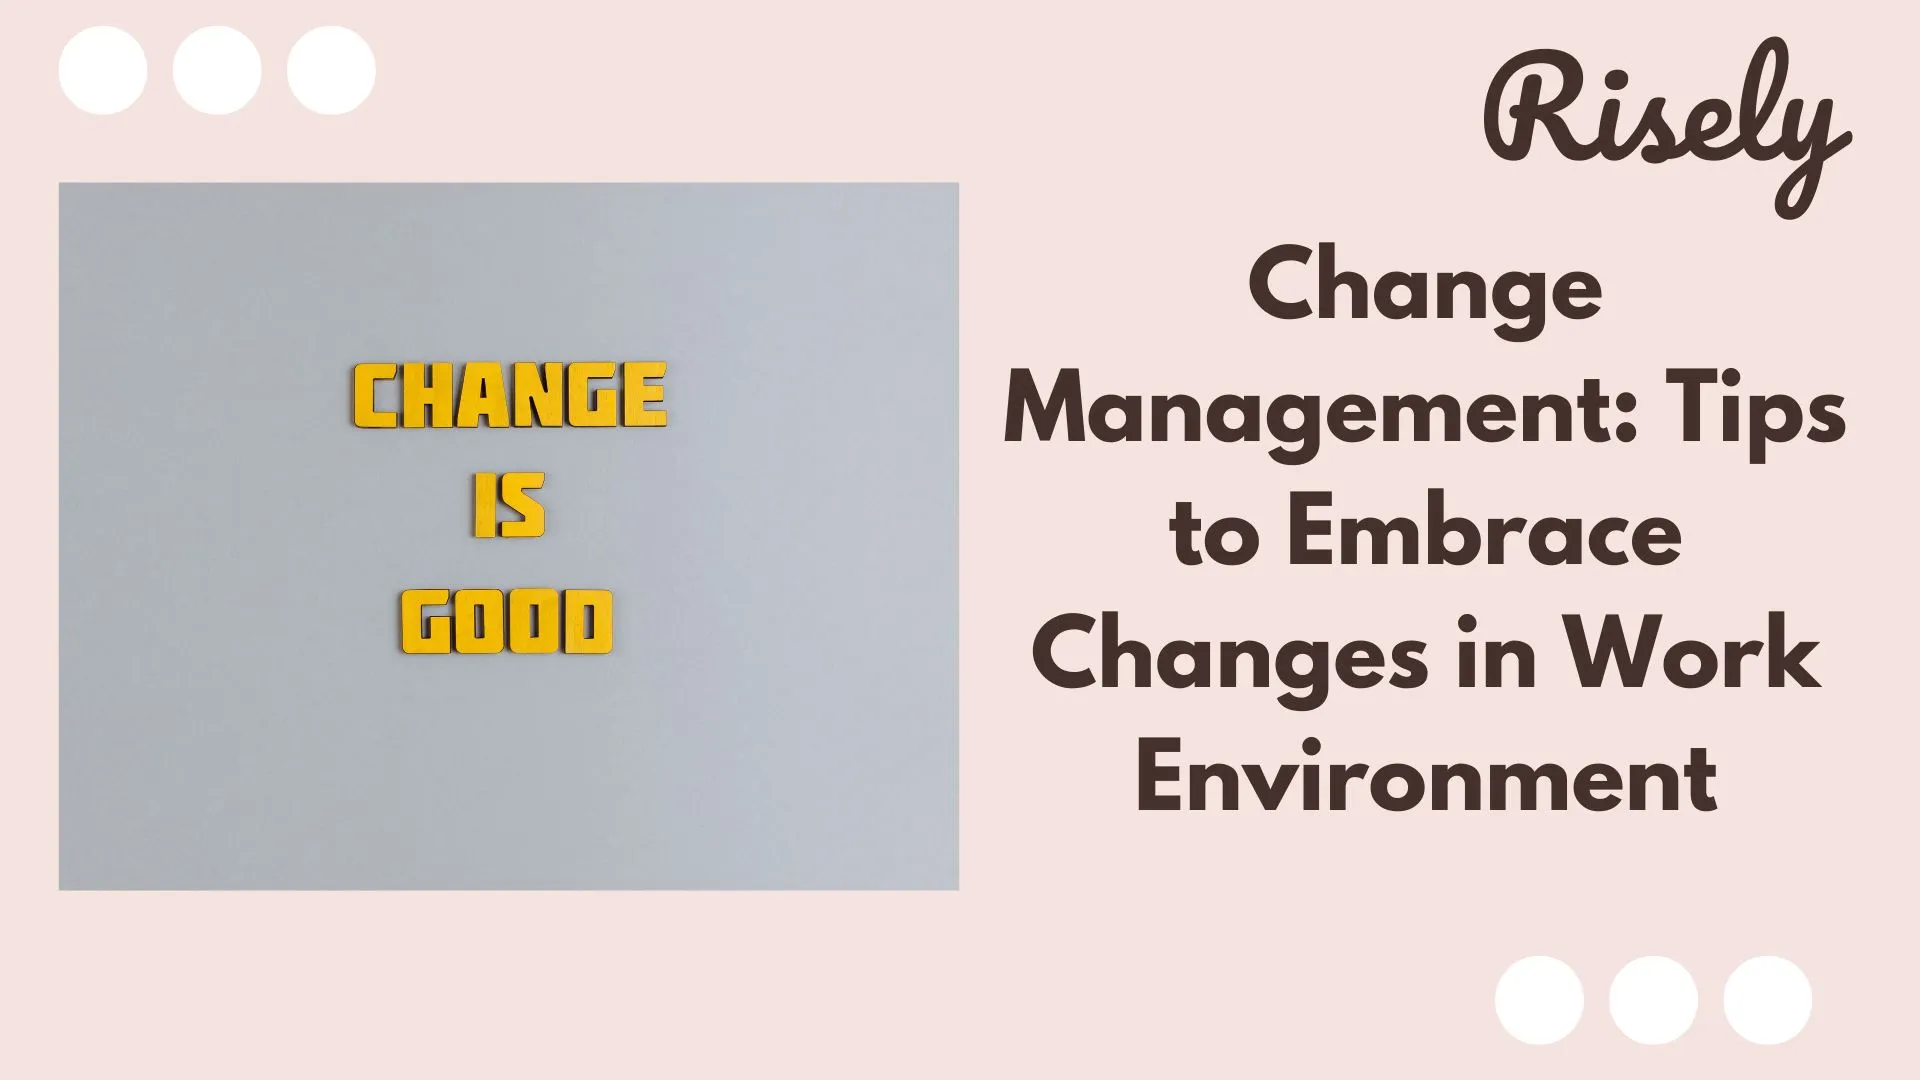 Change Management: Tips to Embrace Changes in Work Environment